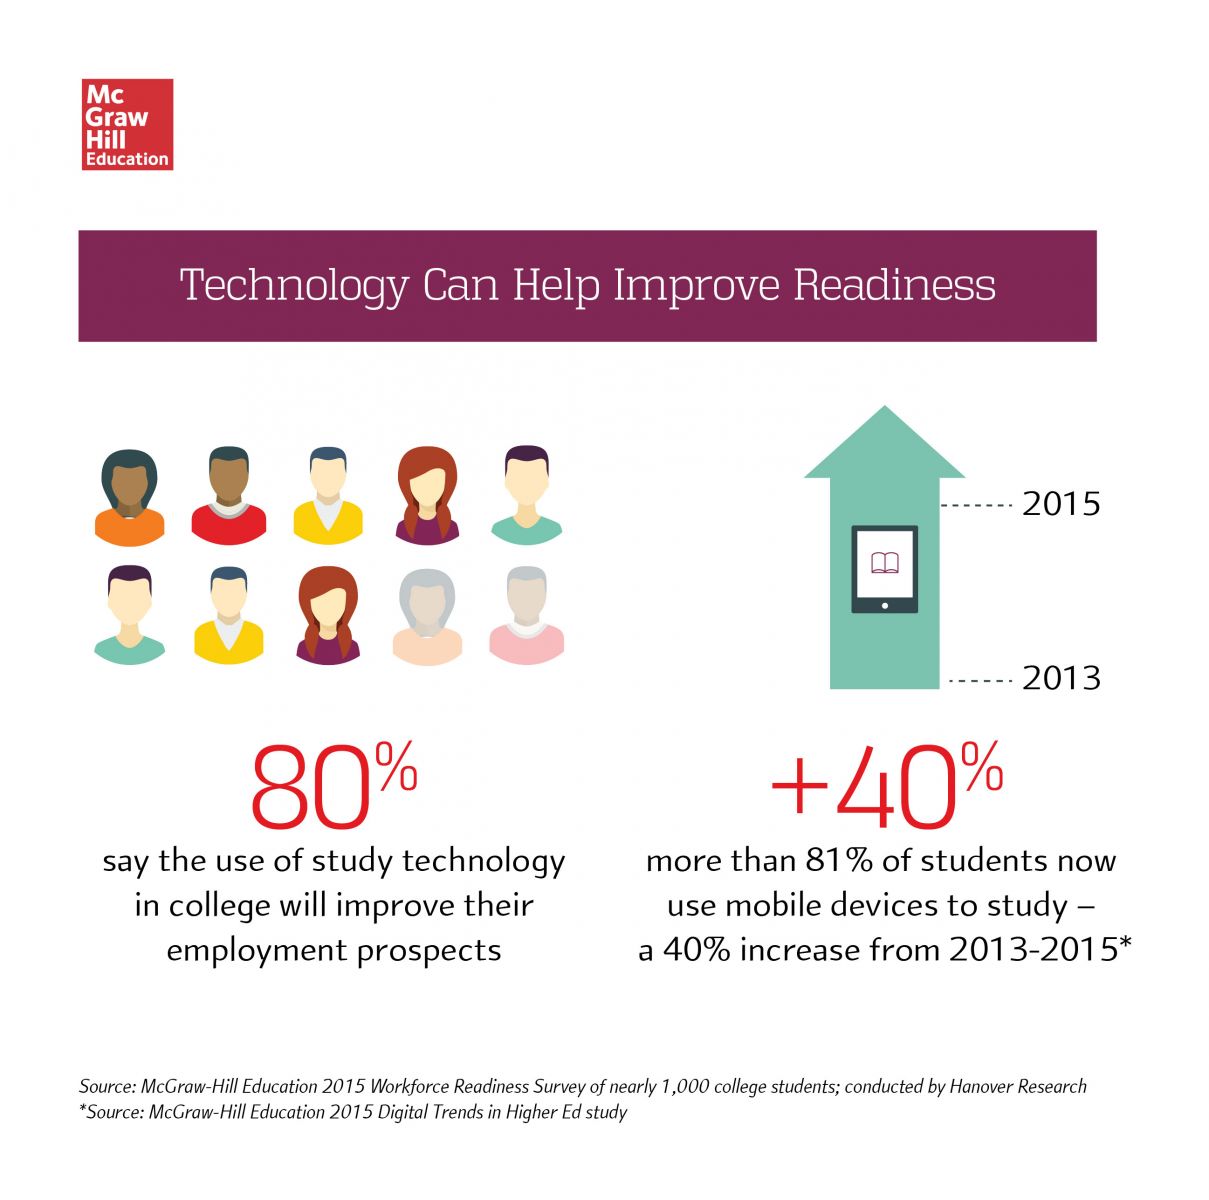 Technology can help improve readiness infographic